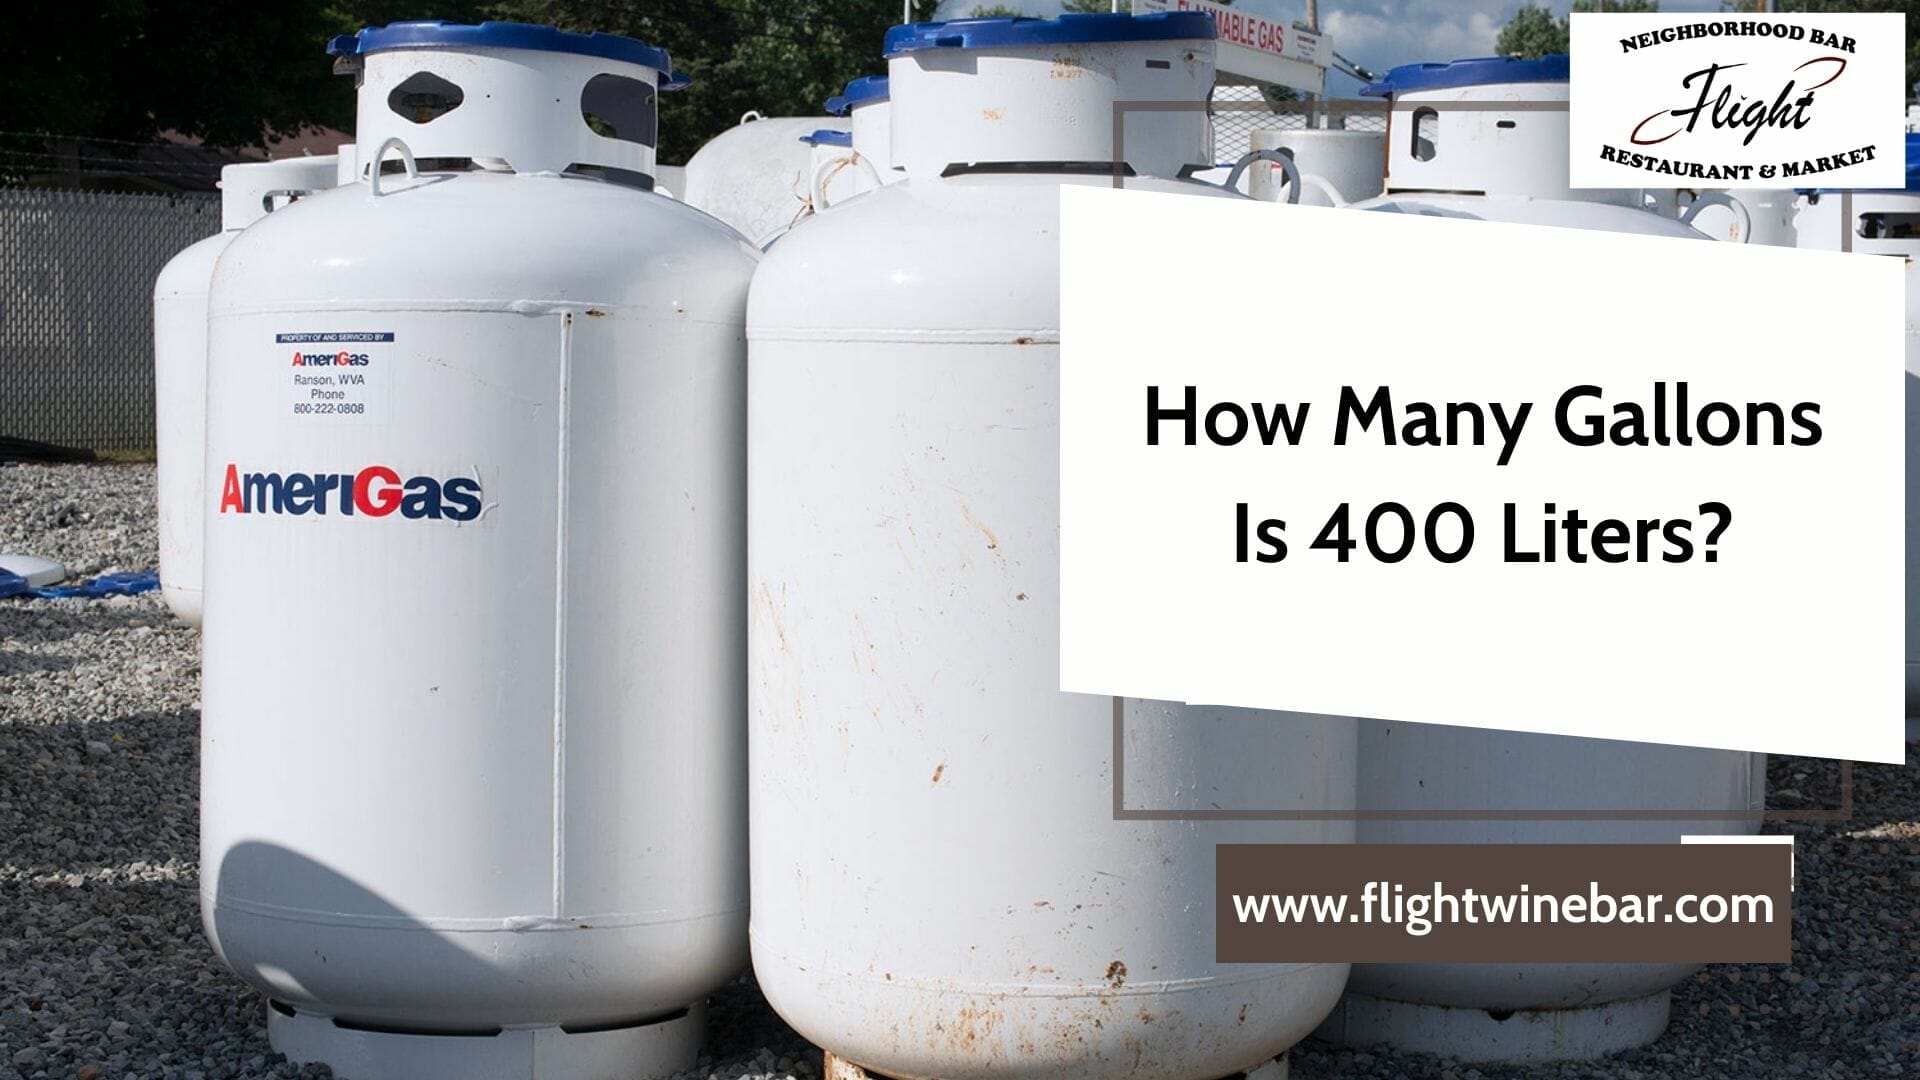 How Many Gallons Is 400 Liters